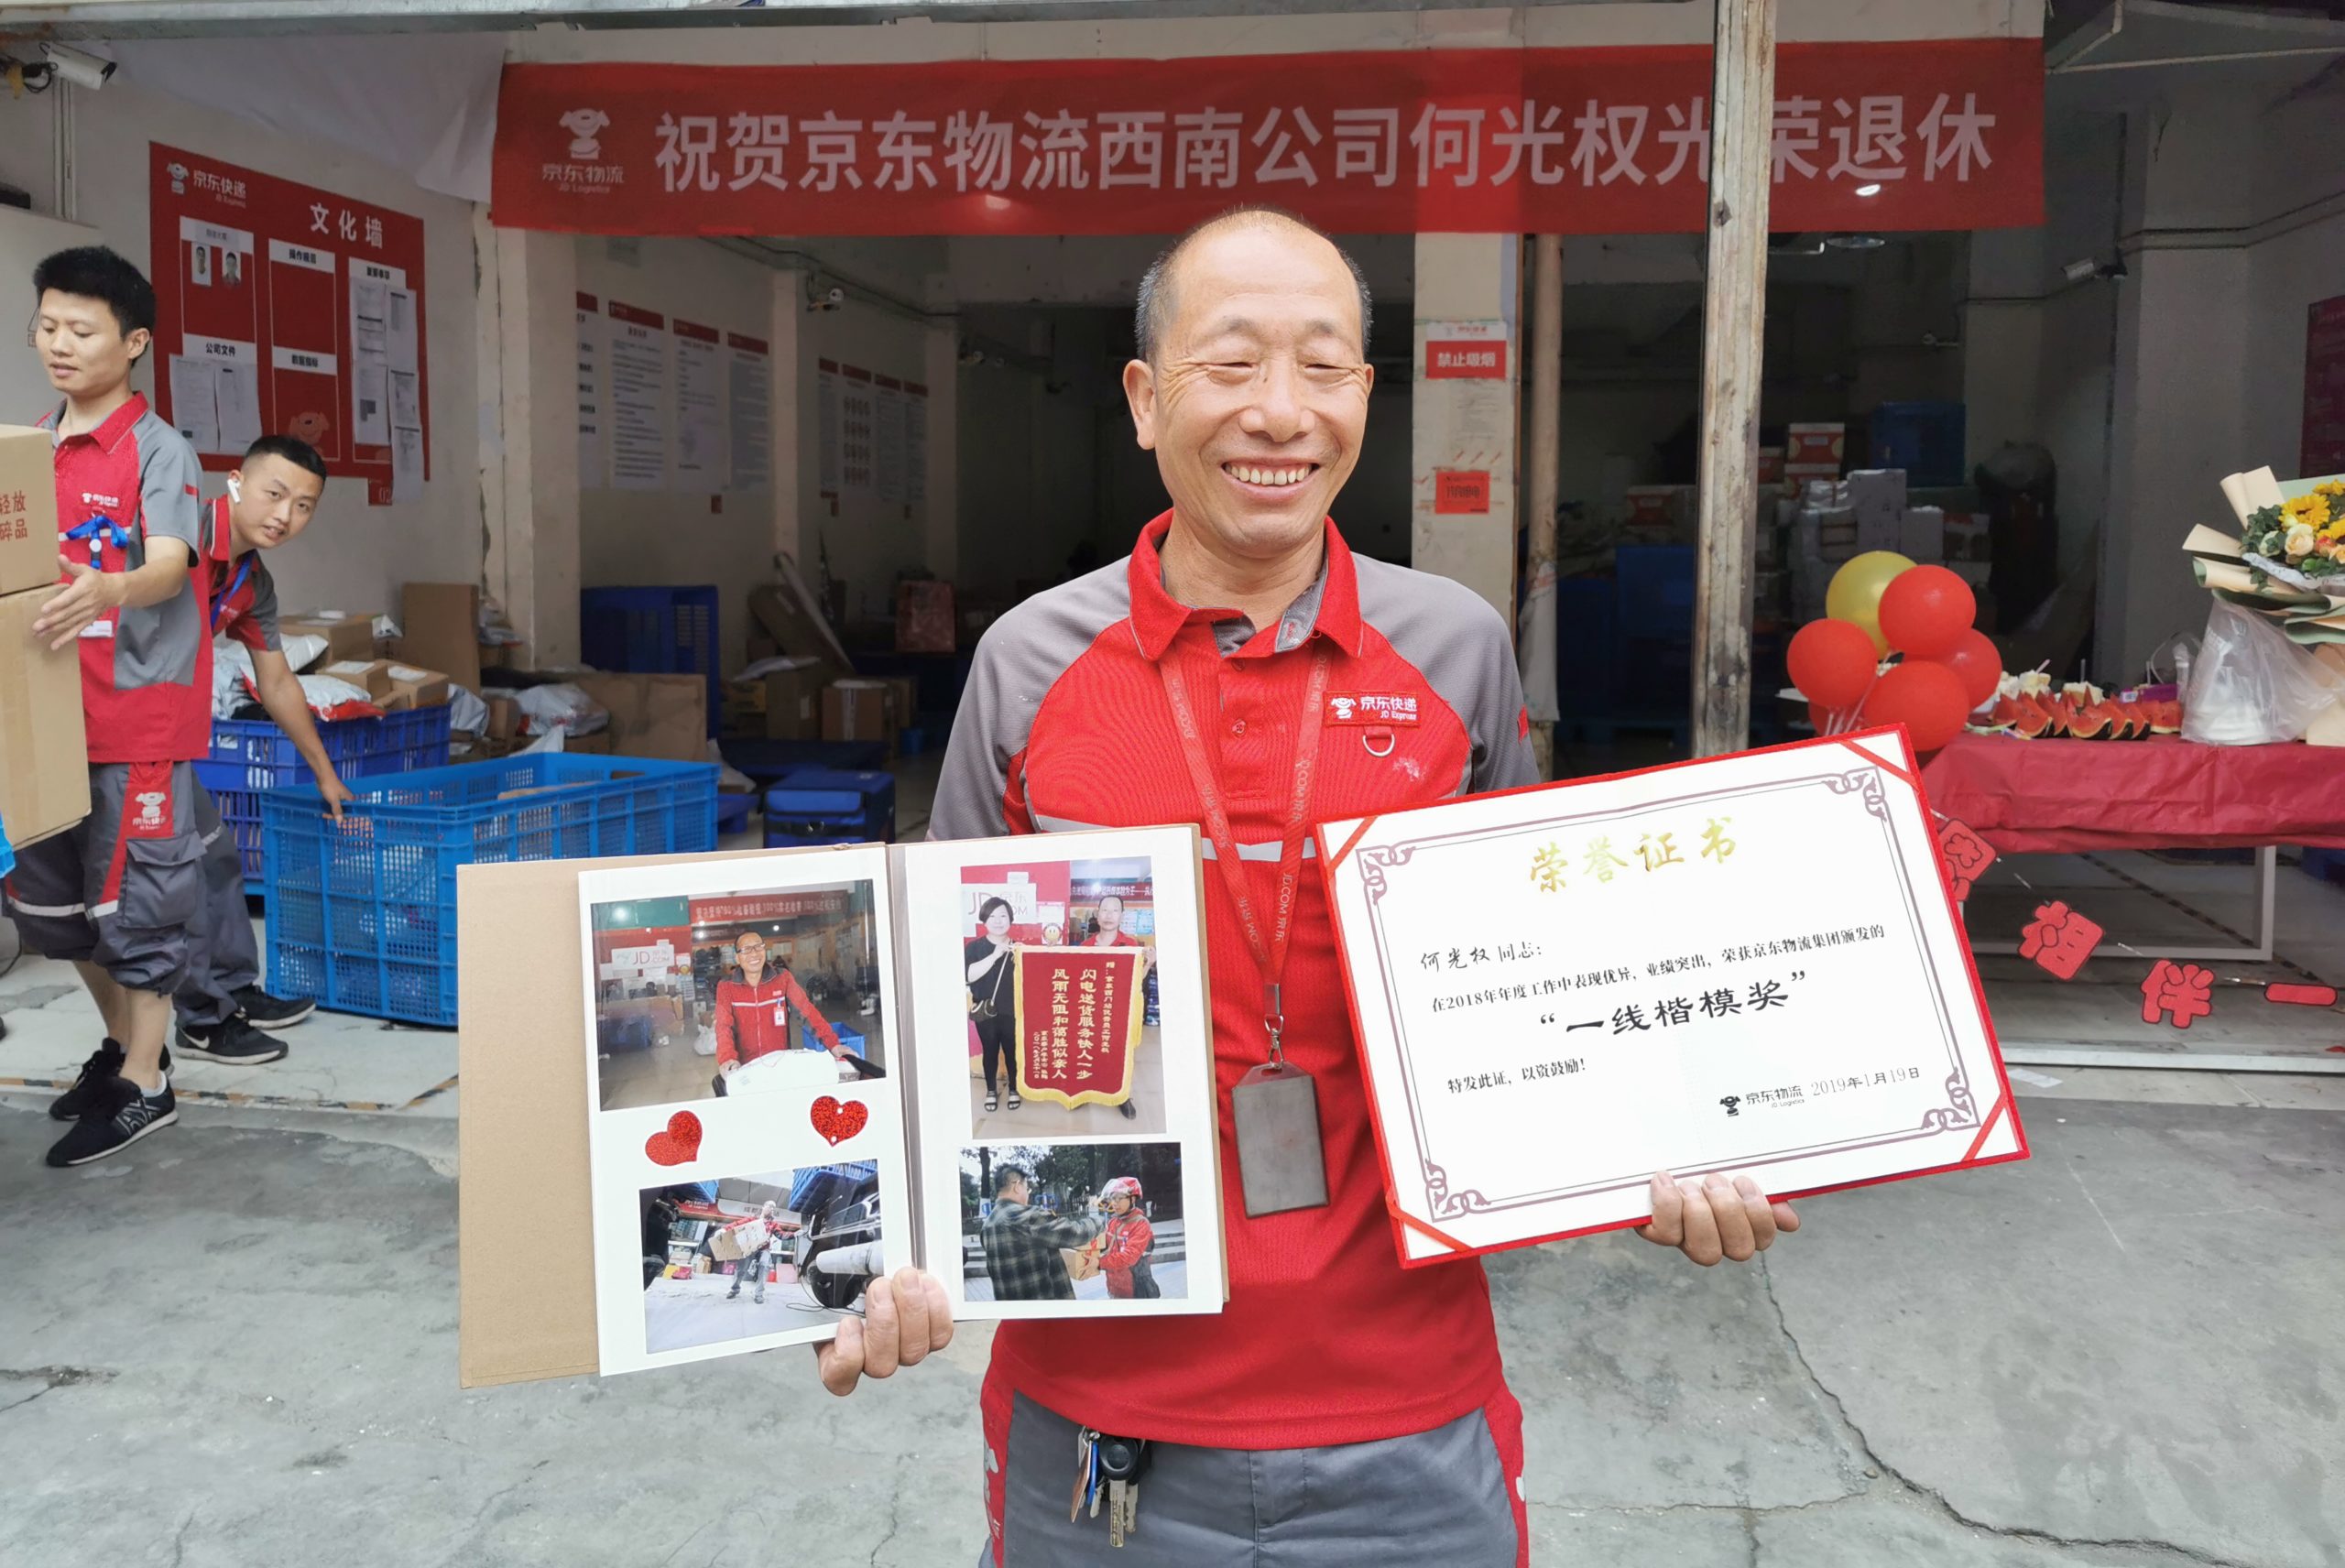 July 15th is not an ordinary day for Guangquan He, a courier at JD’s Chengdu Yingmenkou delivery station. It is his 60th birthday, as well as the official date of his retirement from JD.com